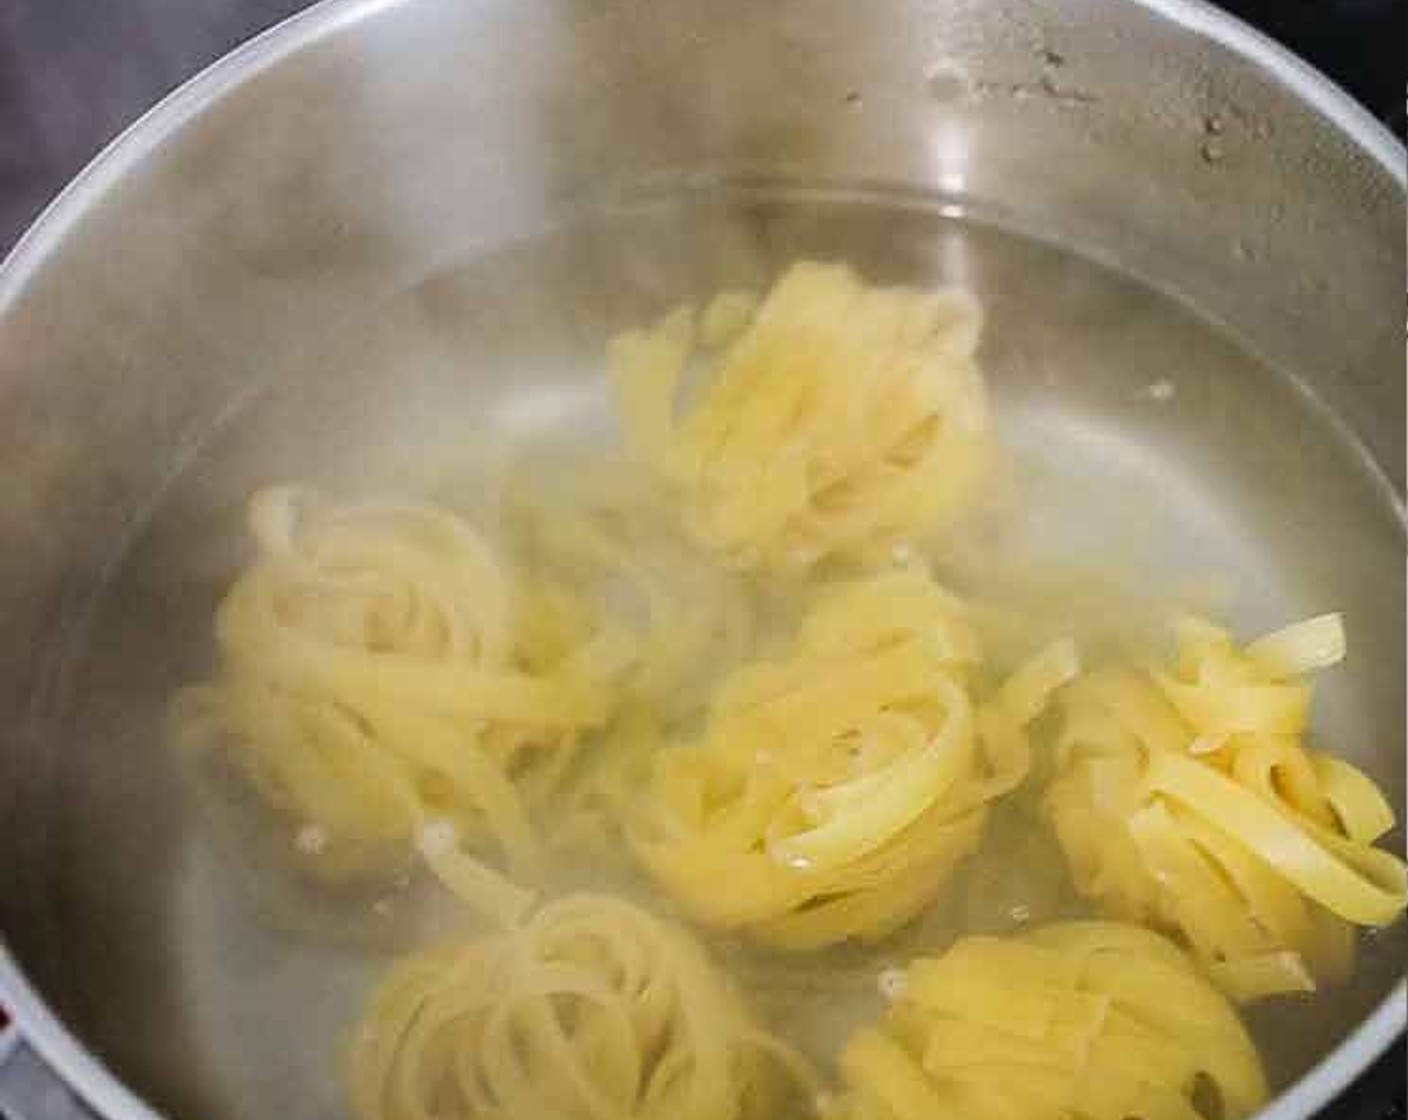 step 1 Bring Water (3 1/3 cups) with Salt (1 tsp) to a boil. Once boiling, cook the Tagliatelle (6.5 oz) according to package instructions.